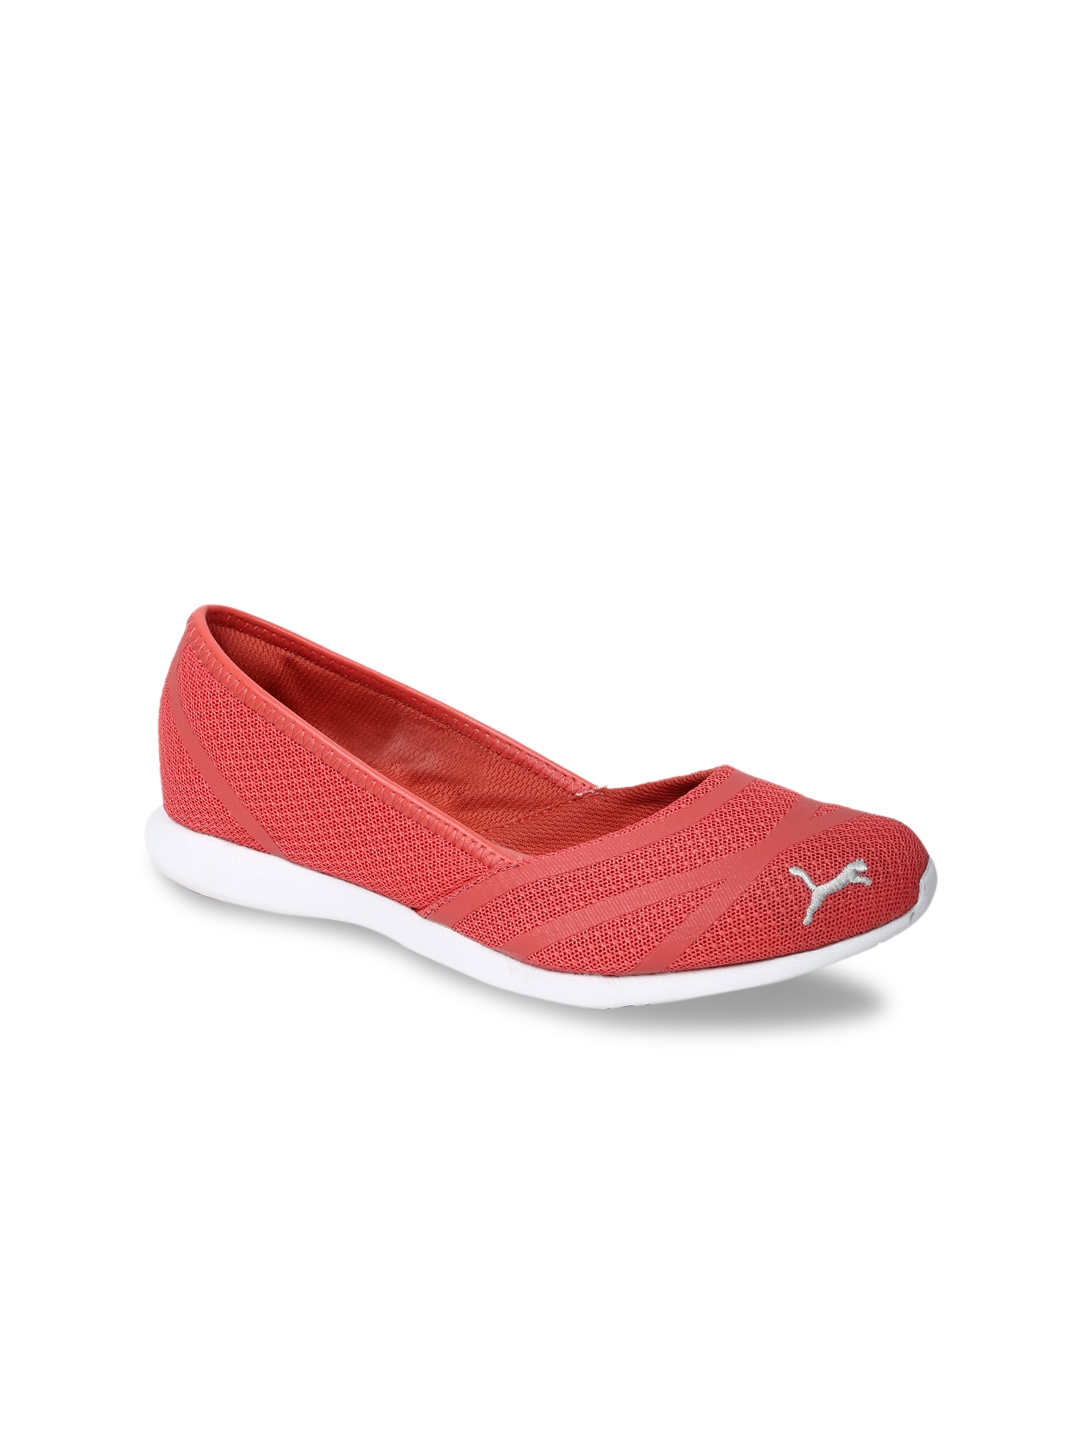 Buy Puma Women Coral Red Solid 